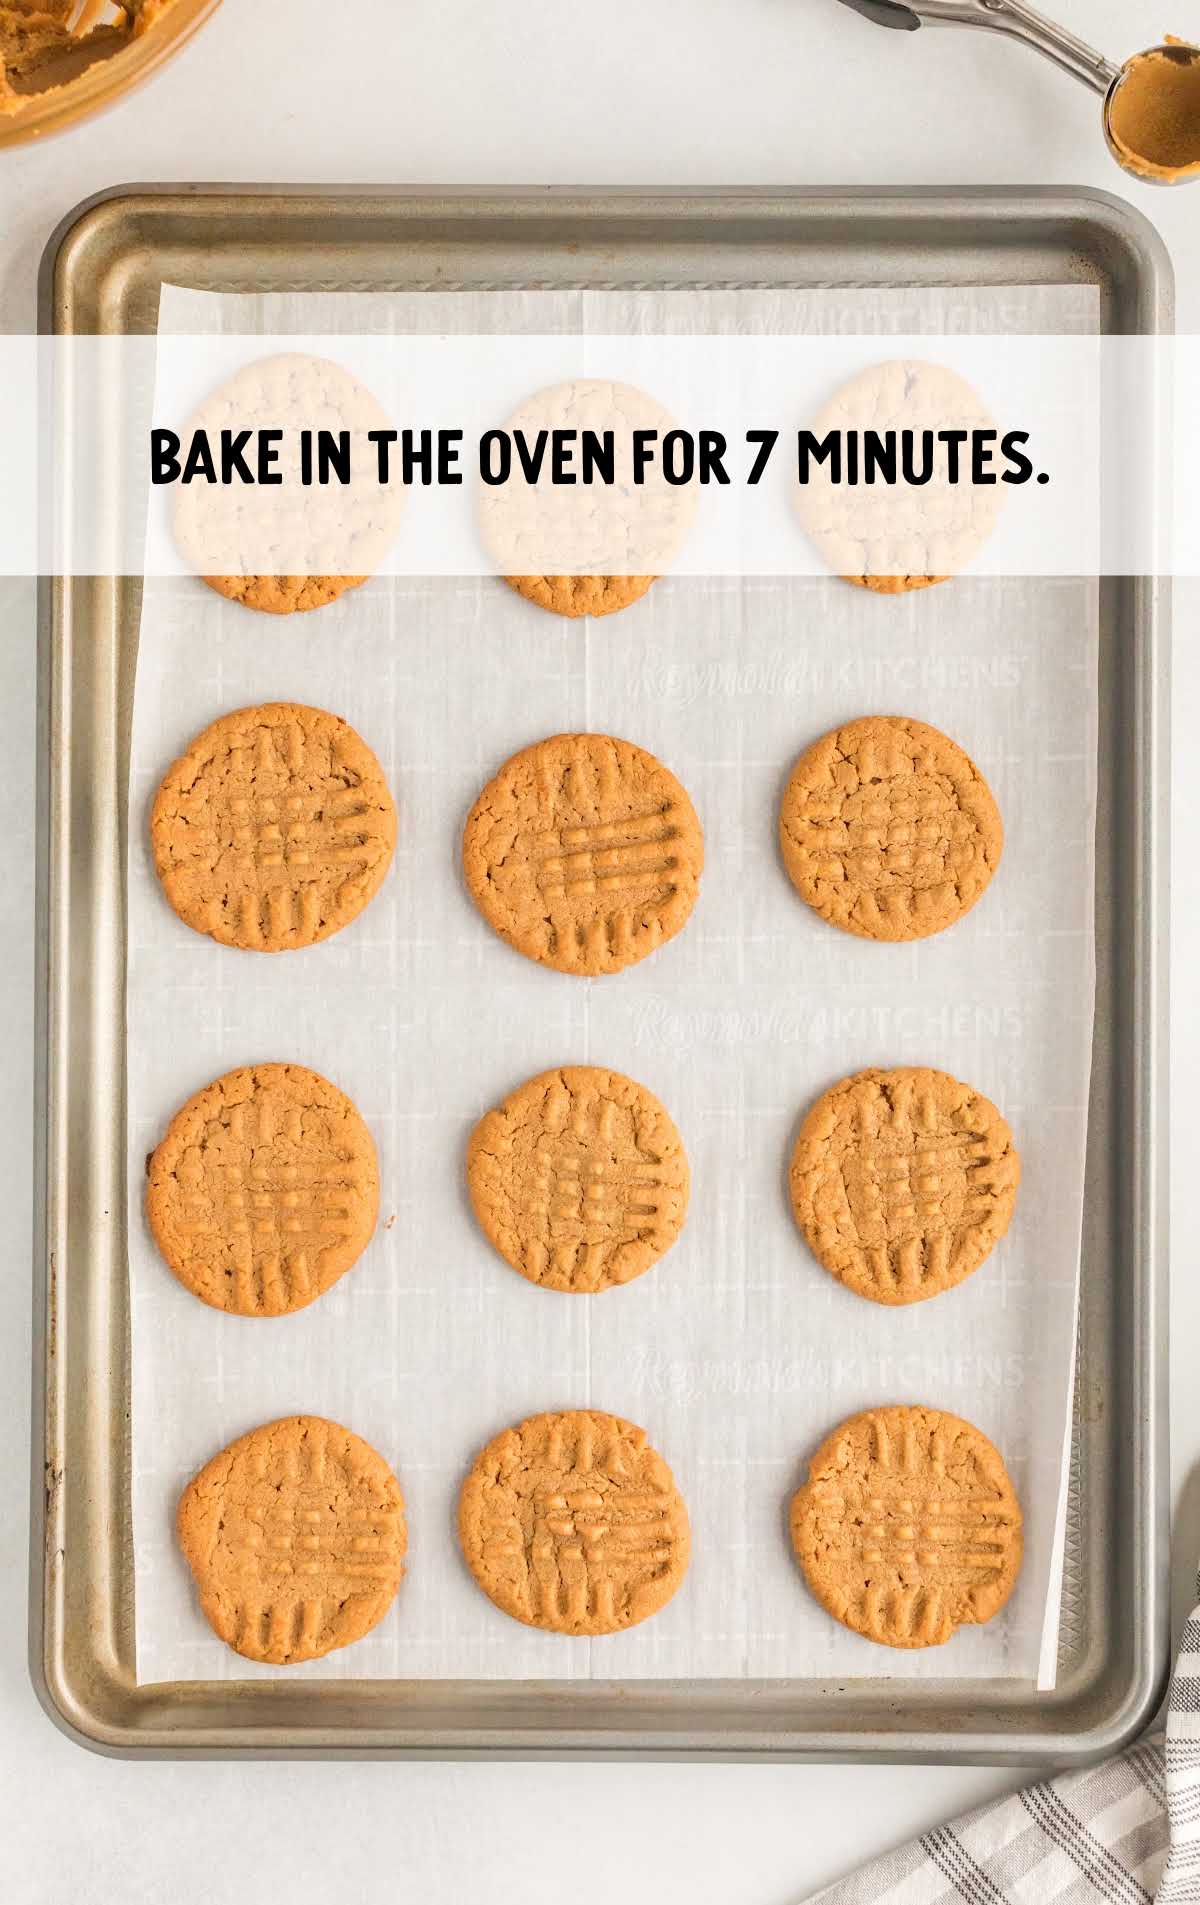 3 Ingredient Peanut Butter Cookies baked in the oven